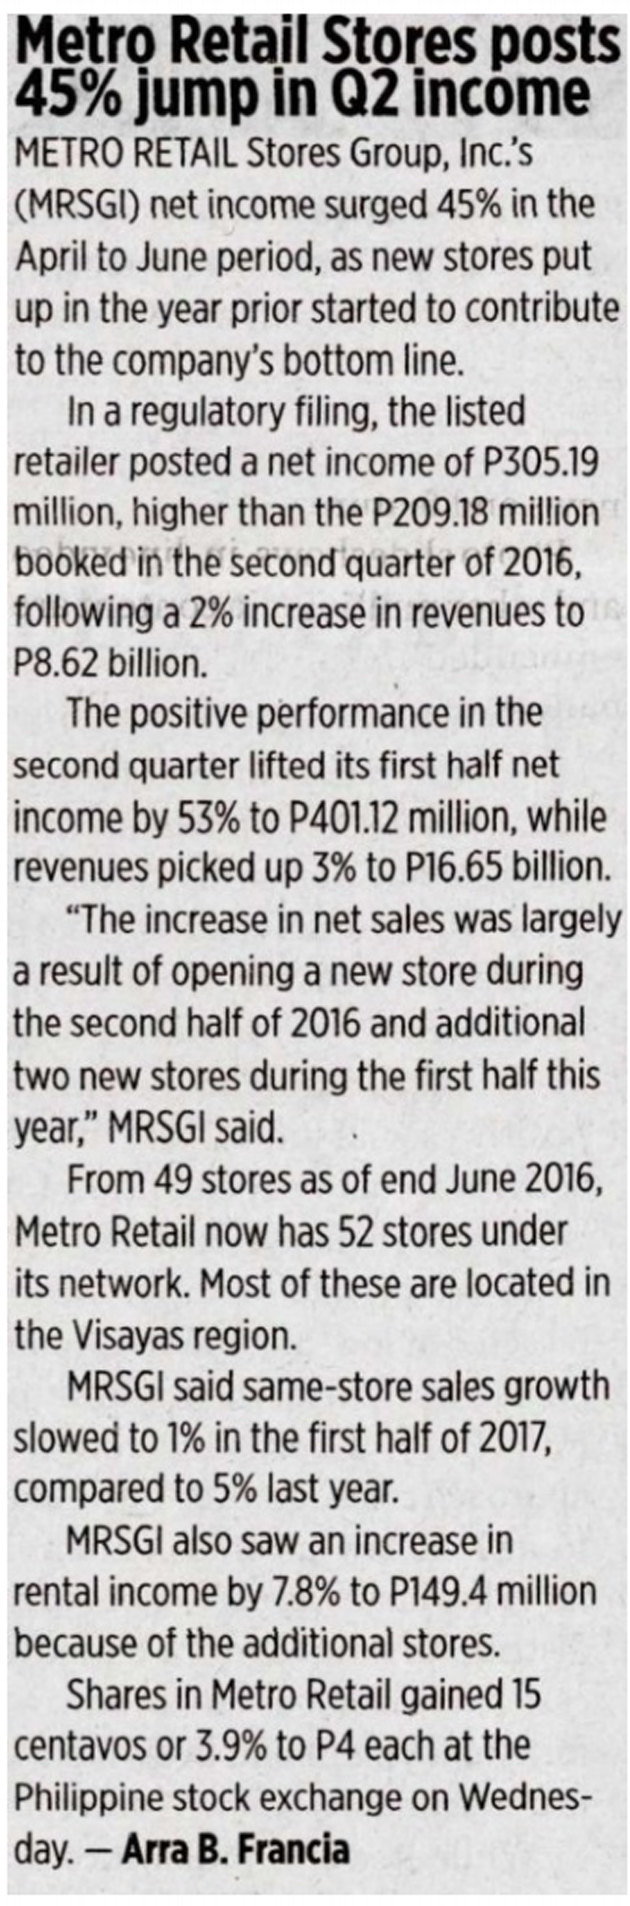 Metro Retail Stores posts 45percent jump in Q2 income